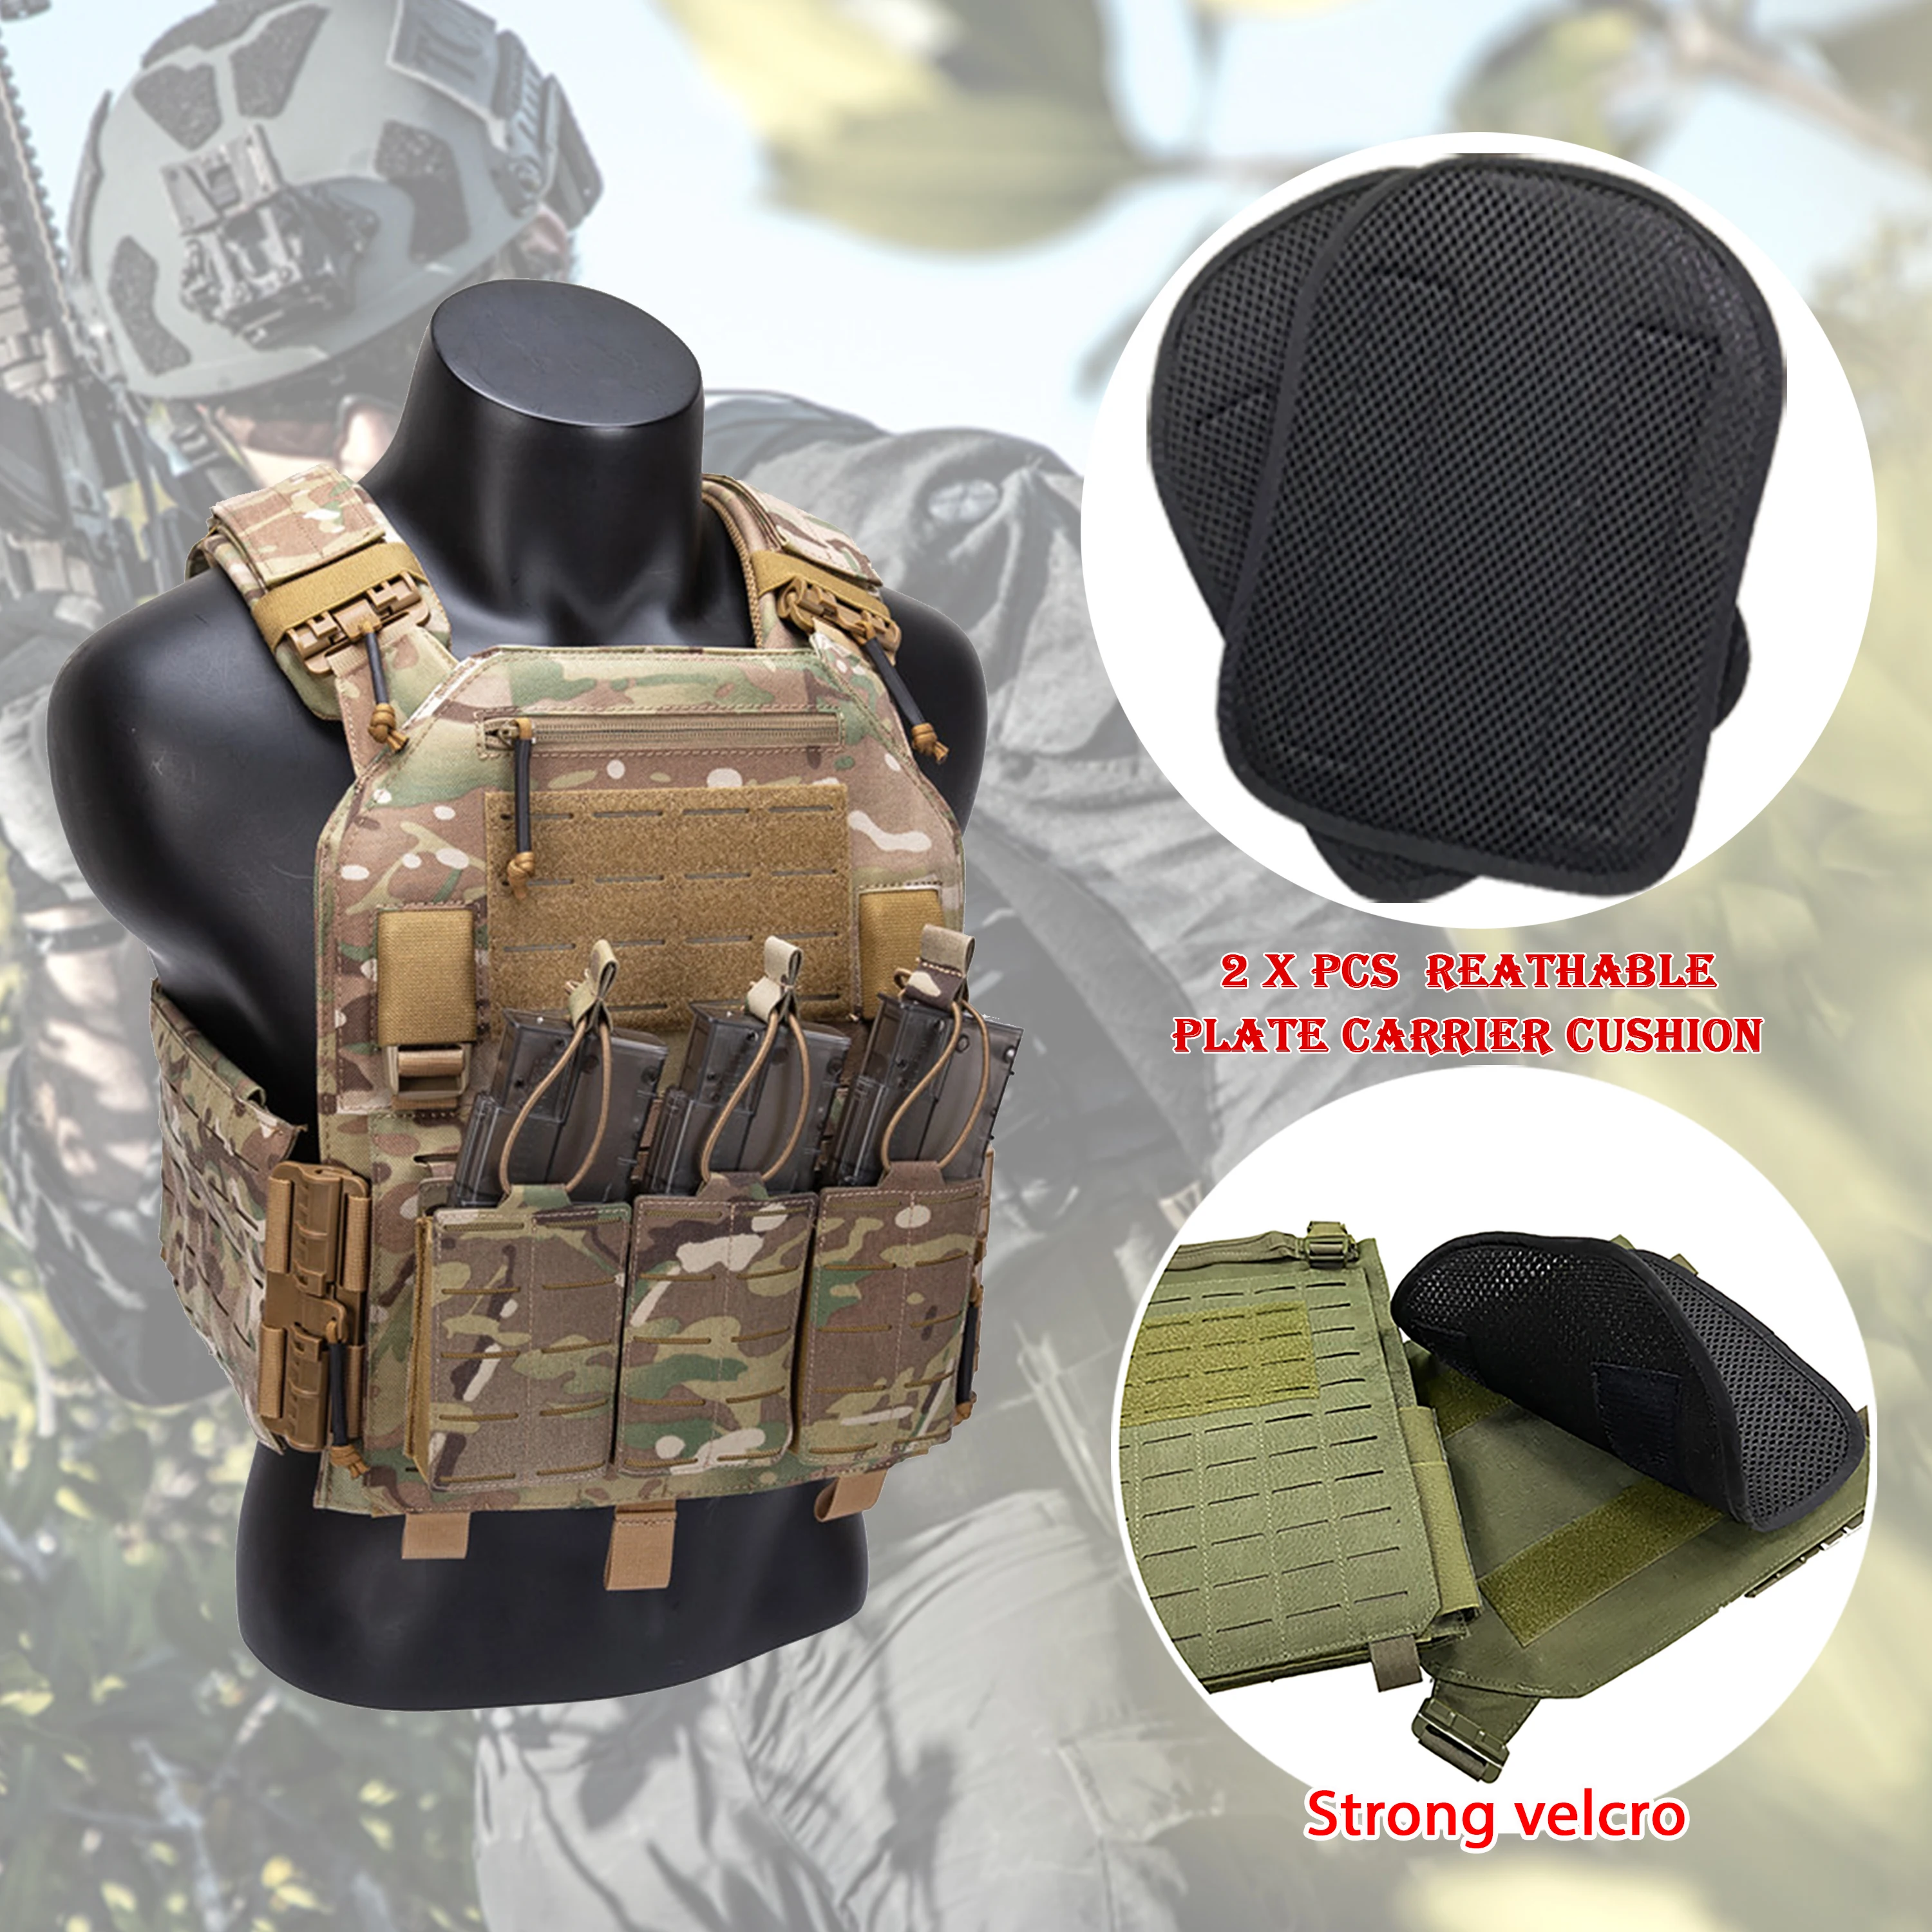 Breathable Black Tactical Vest with Air Mesh, Plate Carrier, Pad for Outdoor Military, Hunting Accessories, 1 Pc Pair